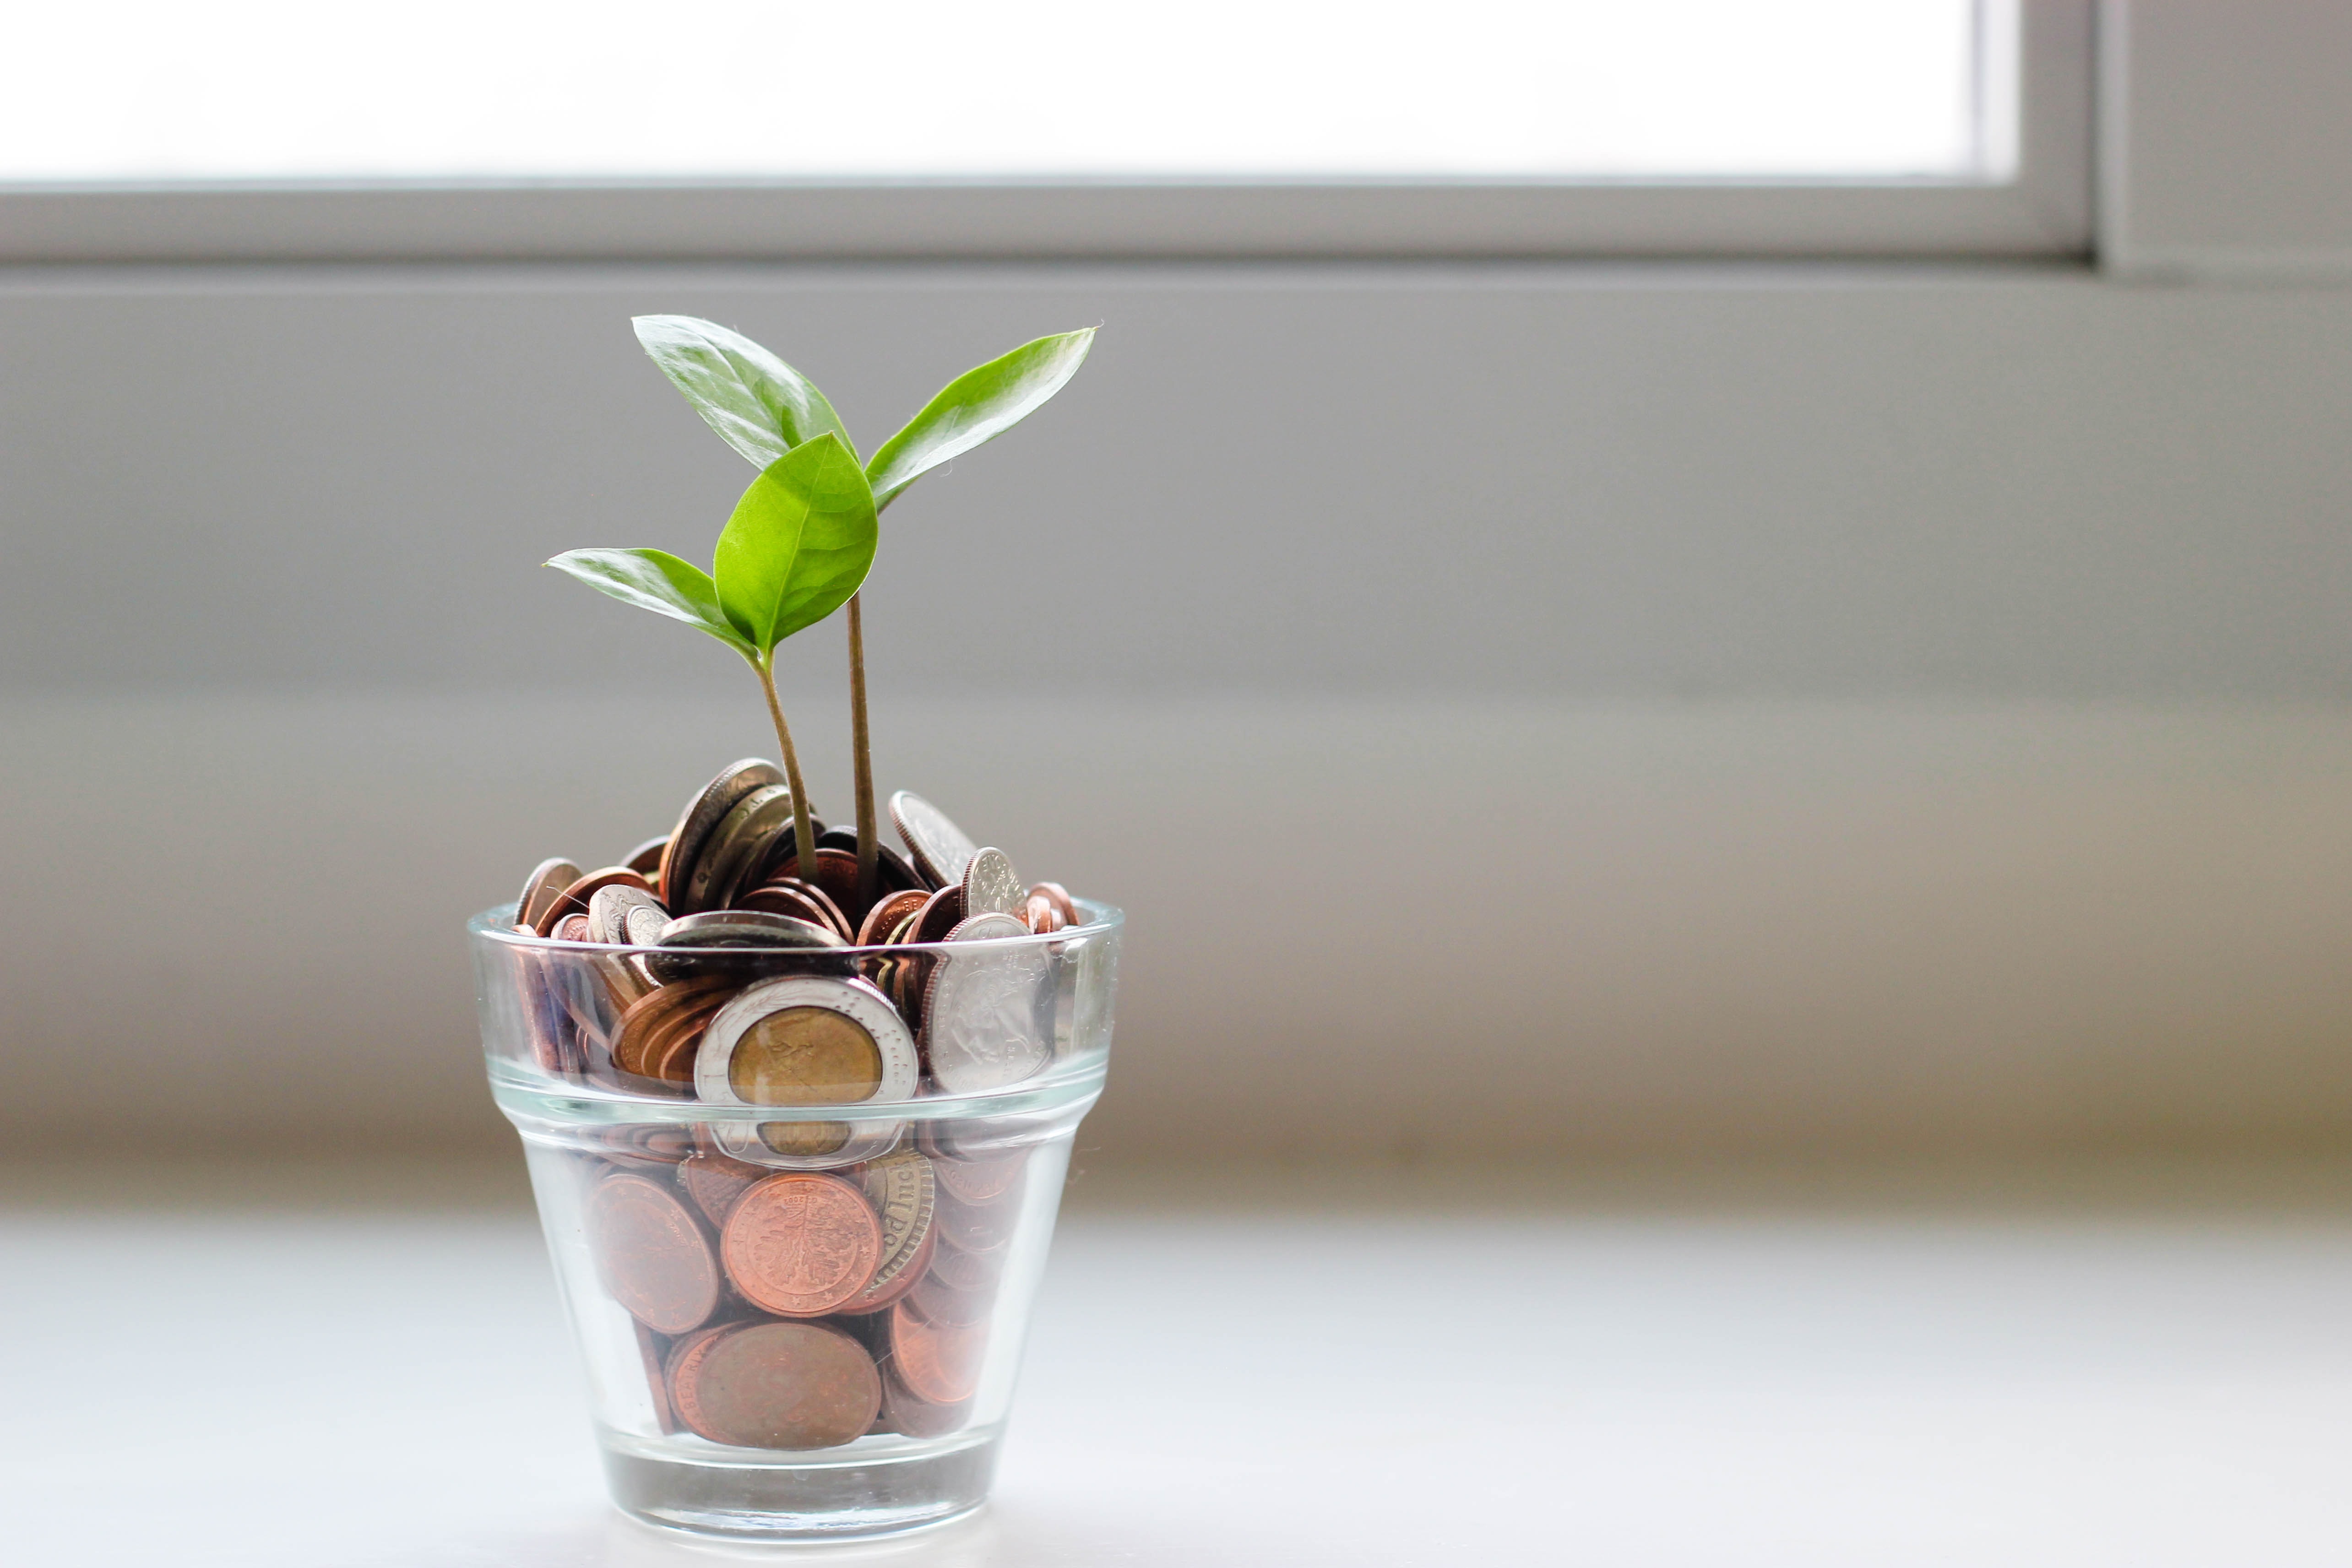 A small plant grows out of a glass jar full of coins